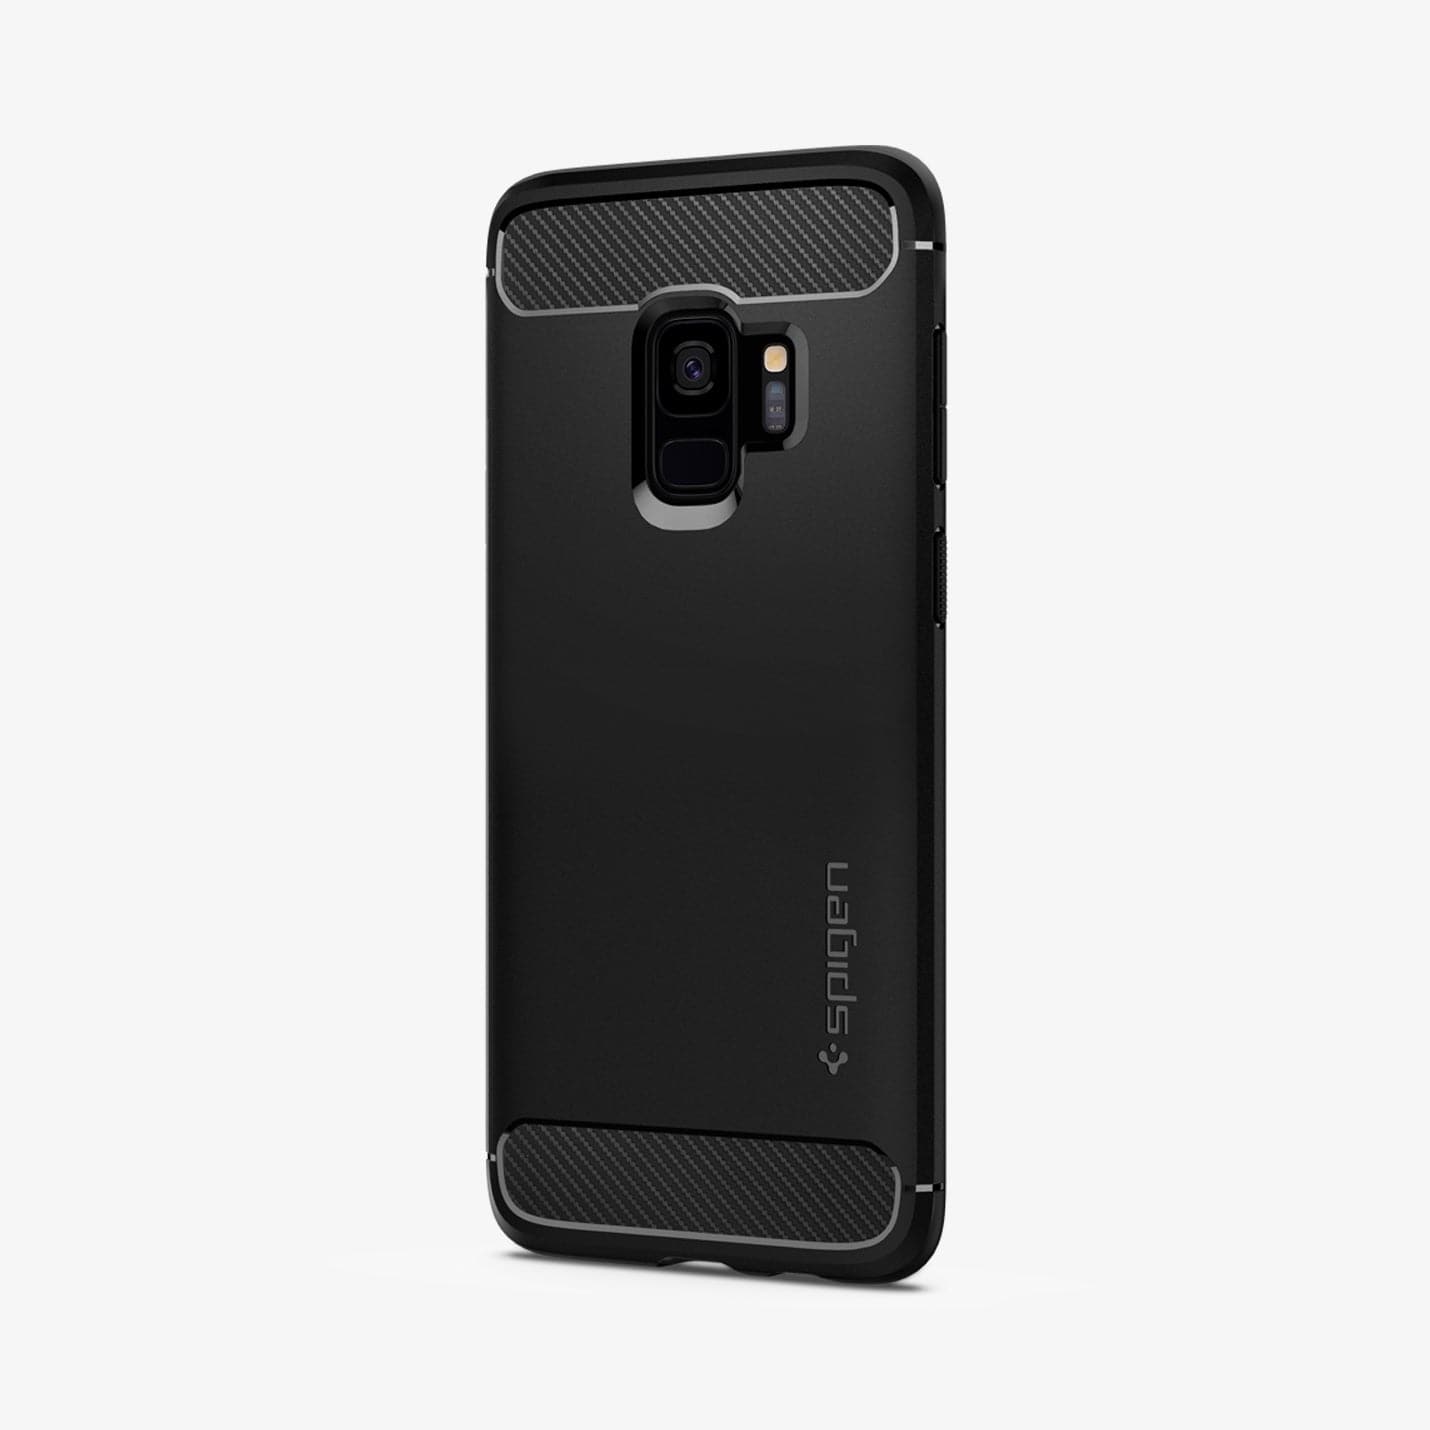 592CS22834 - Galaxy S9 Series Rugged Armor Case in black showing the back and partial side